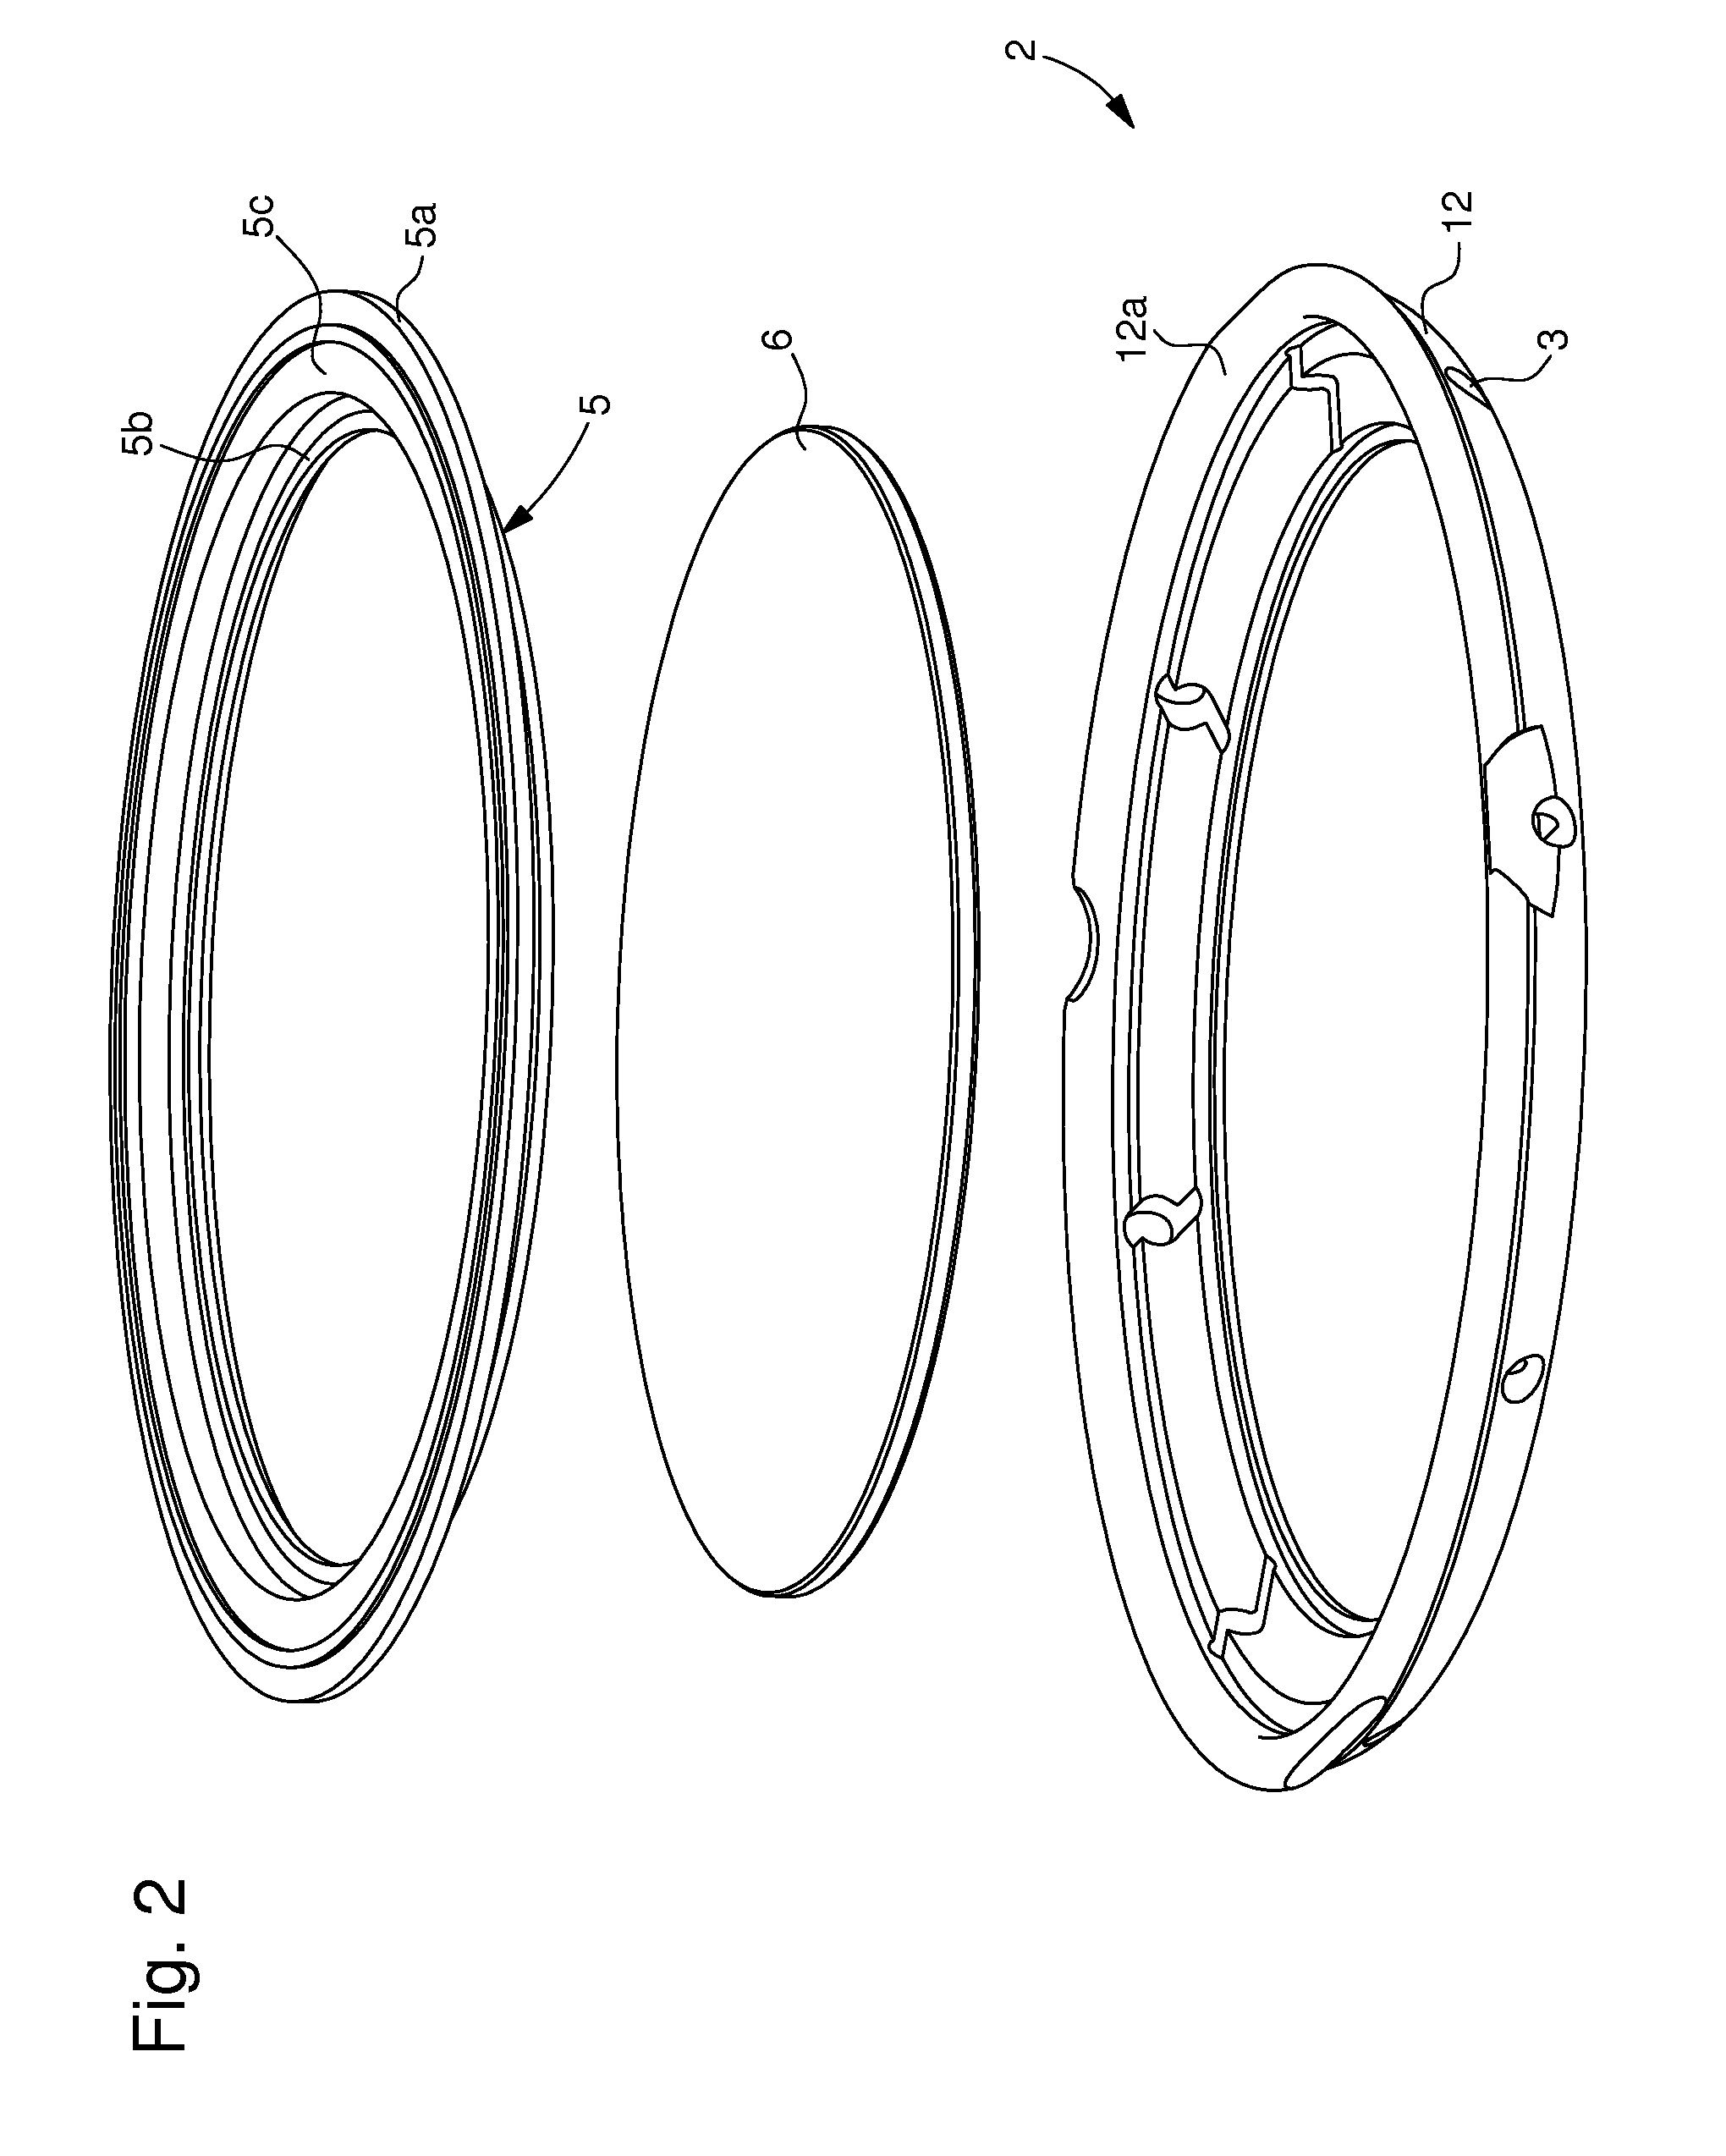 Musical or striking watch provided with an acoustic radiation arrangement